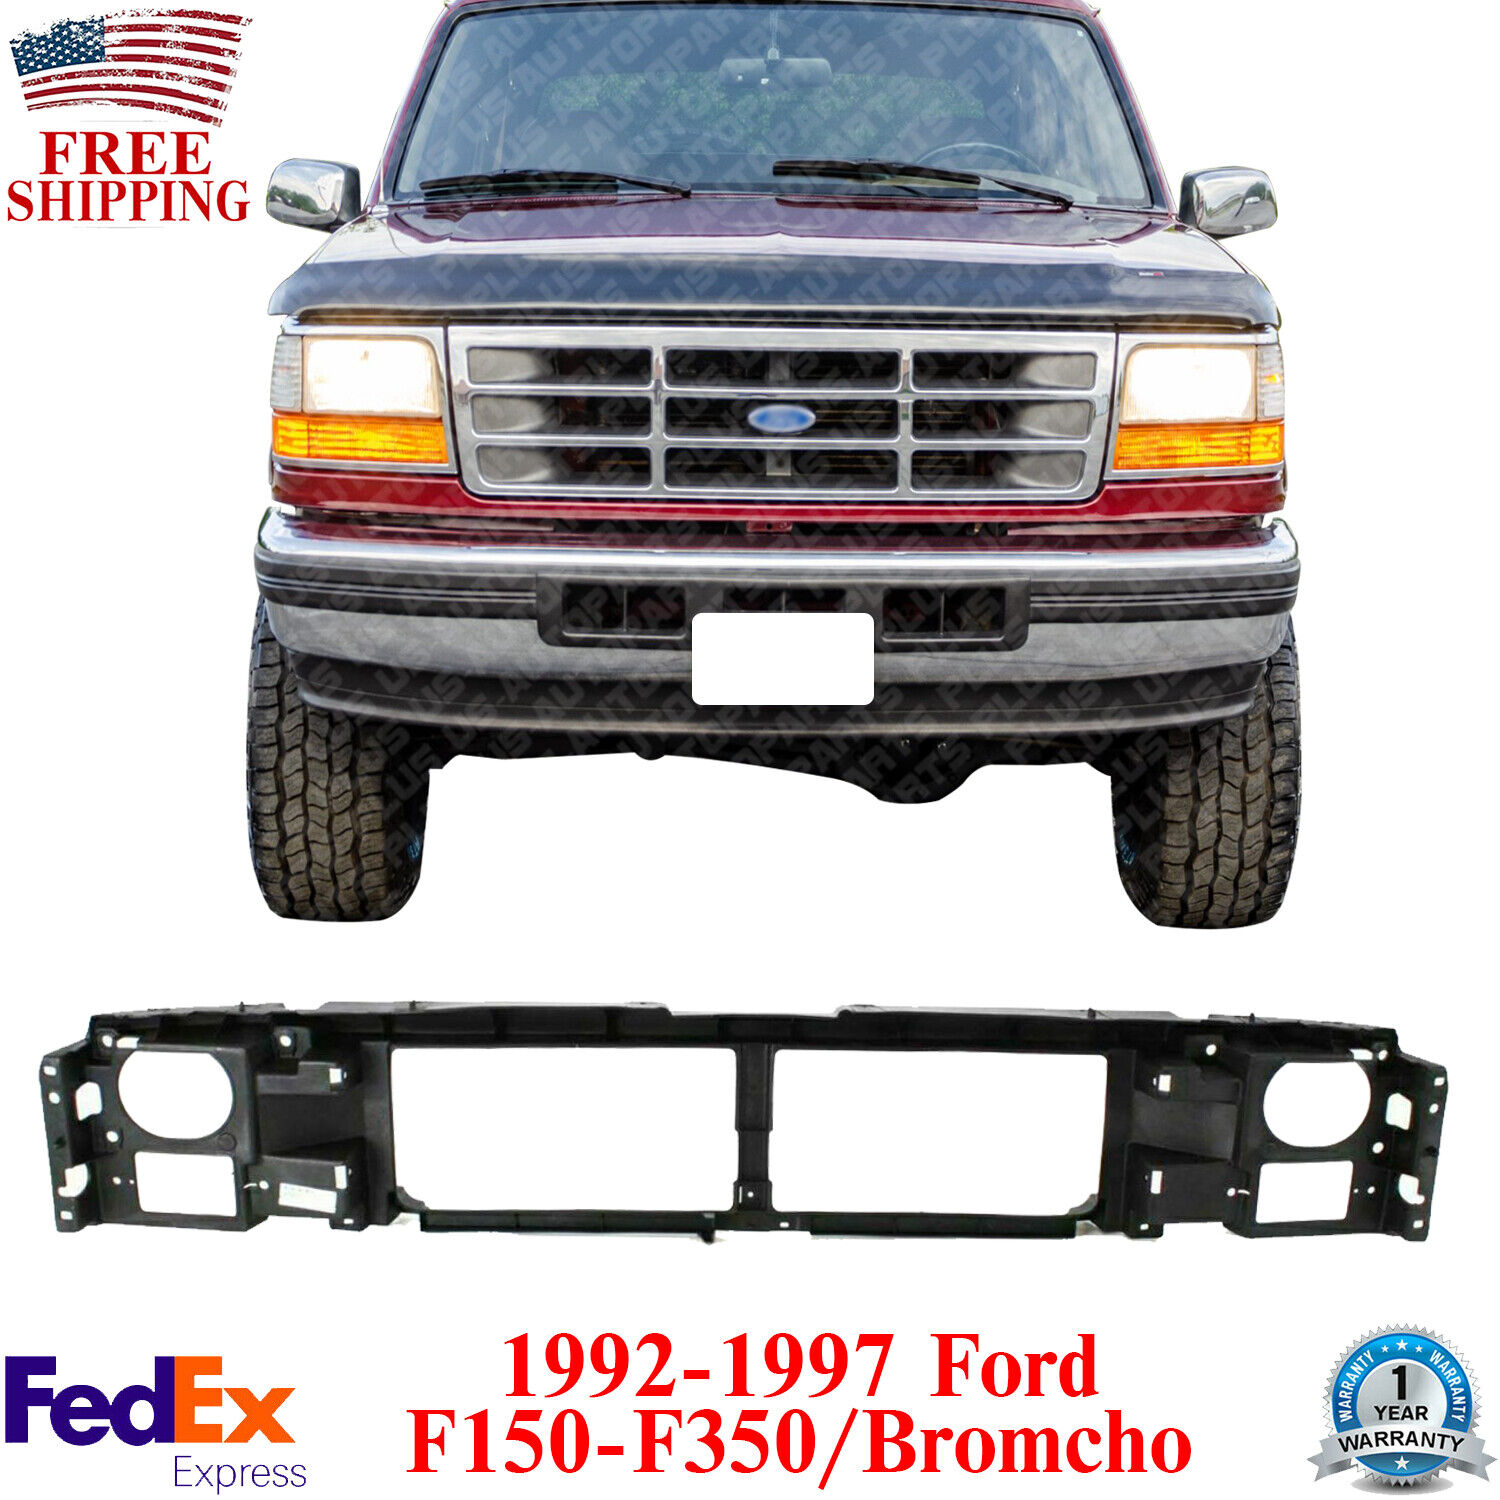 Grille Mounting Header Panel For 1992-1997 Ford F-150 F-250 F-350 Ford Bronco